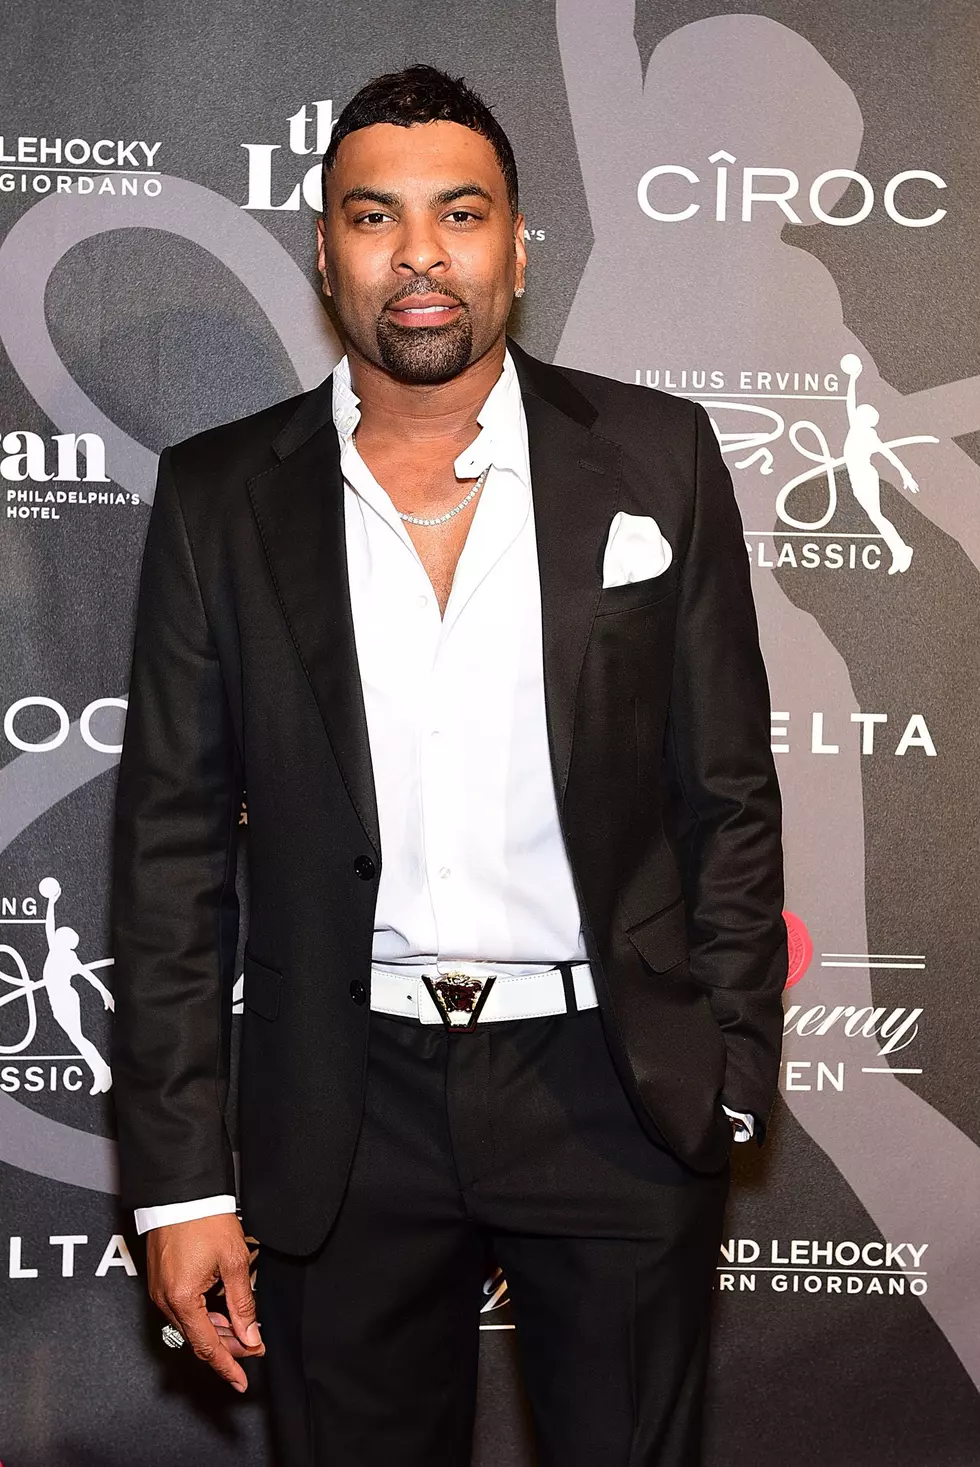 Ginuwine Coming to the Hard Rock in May